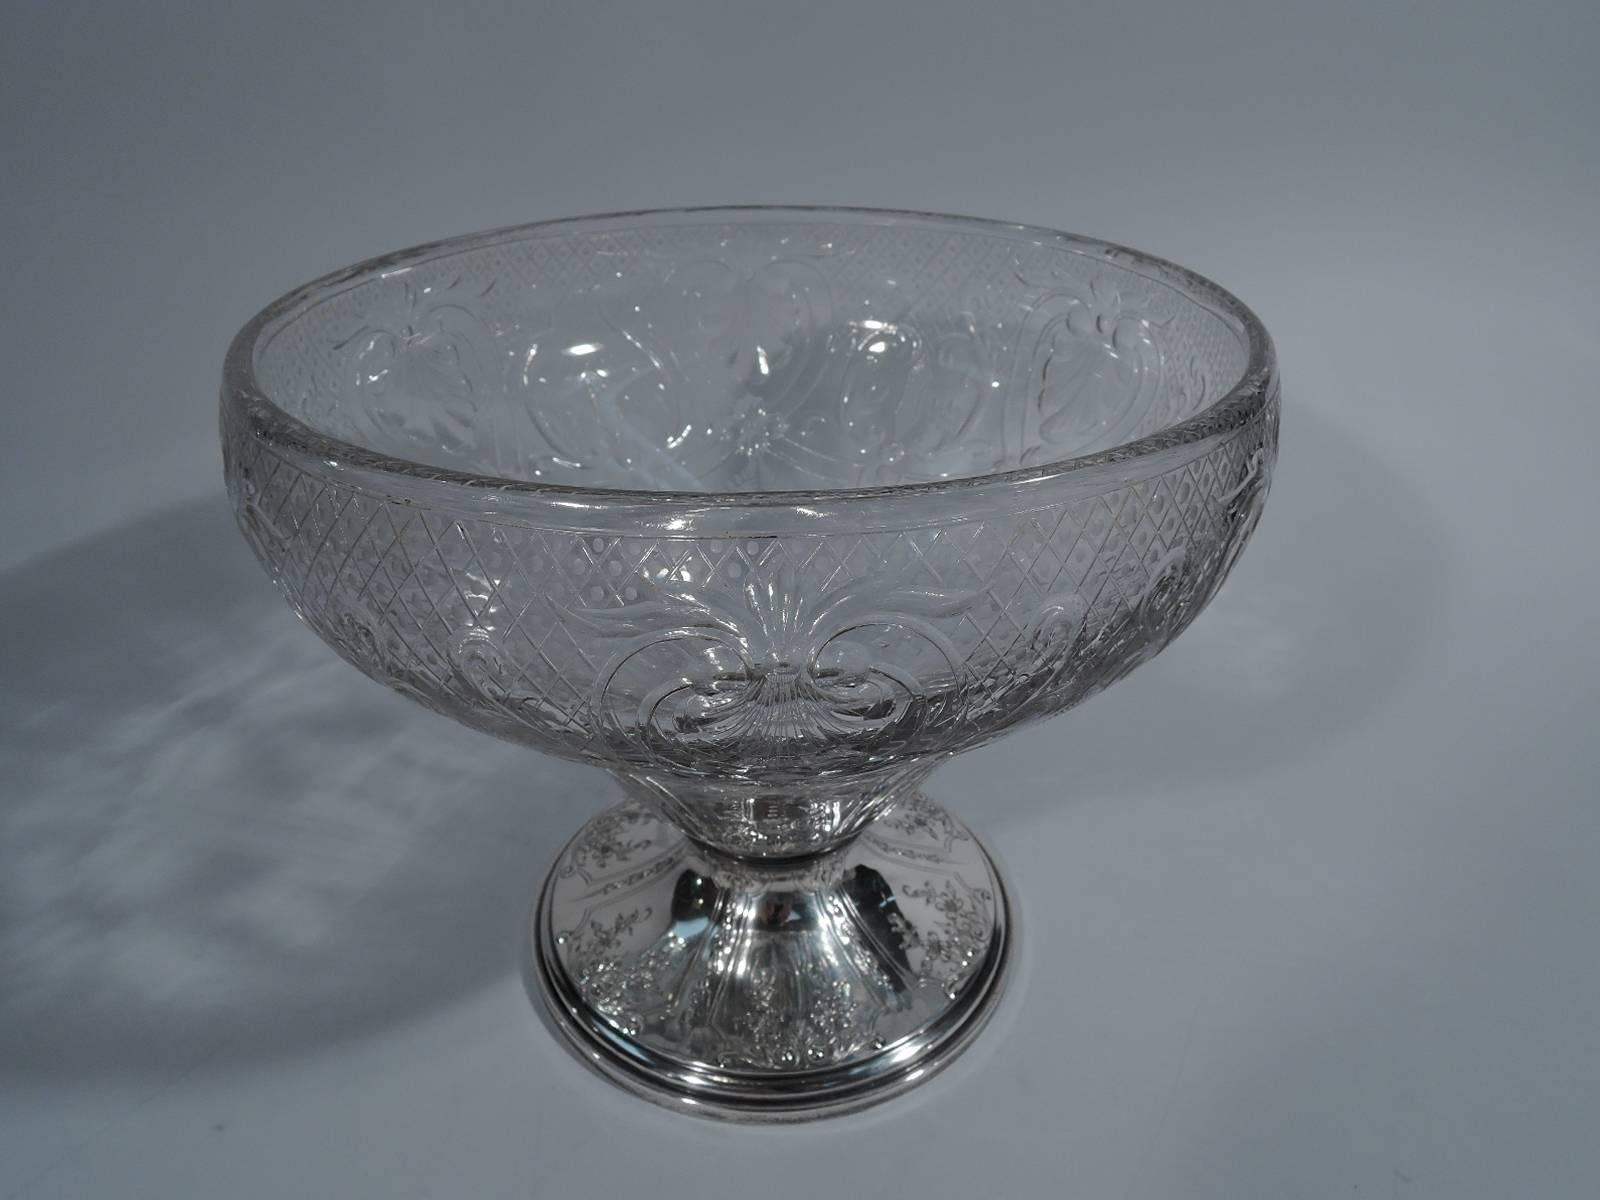 Edwardian sterling silver and crystal centrepiece bowl. Made by Gorham in Providence, circa 1910. Tapering crystal bowl with finely engraved diaper pattern, scrolls, and palmettes as well as acid-etched garlands. Raised foot has flowers set in